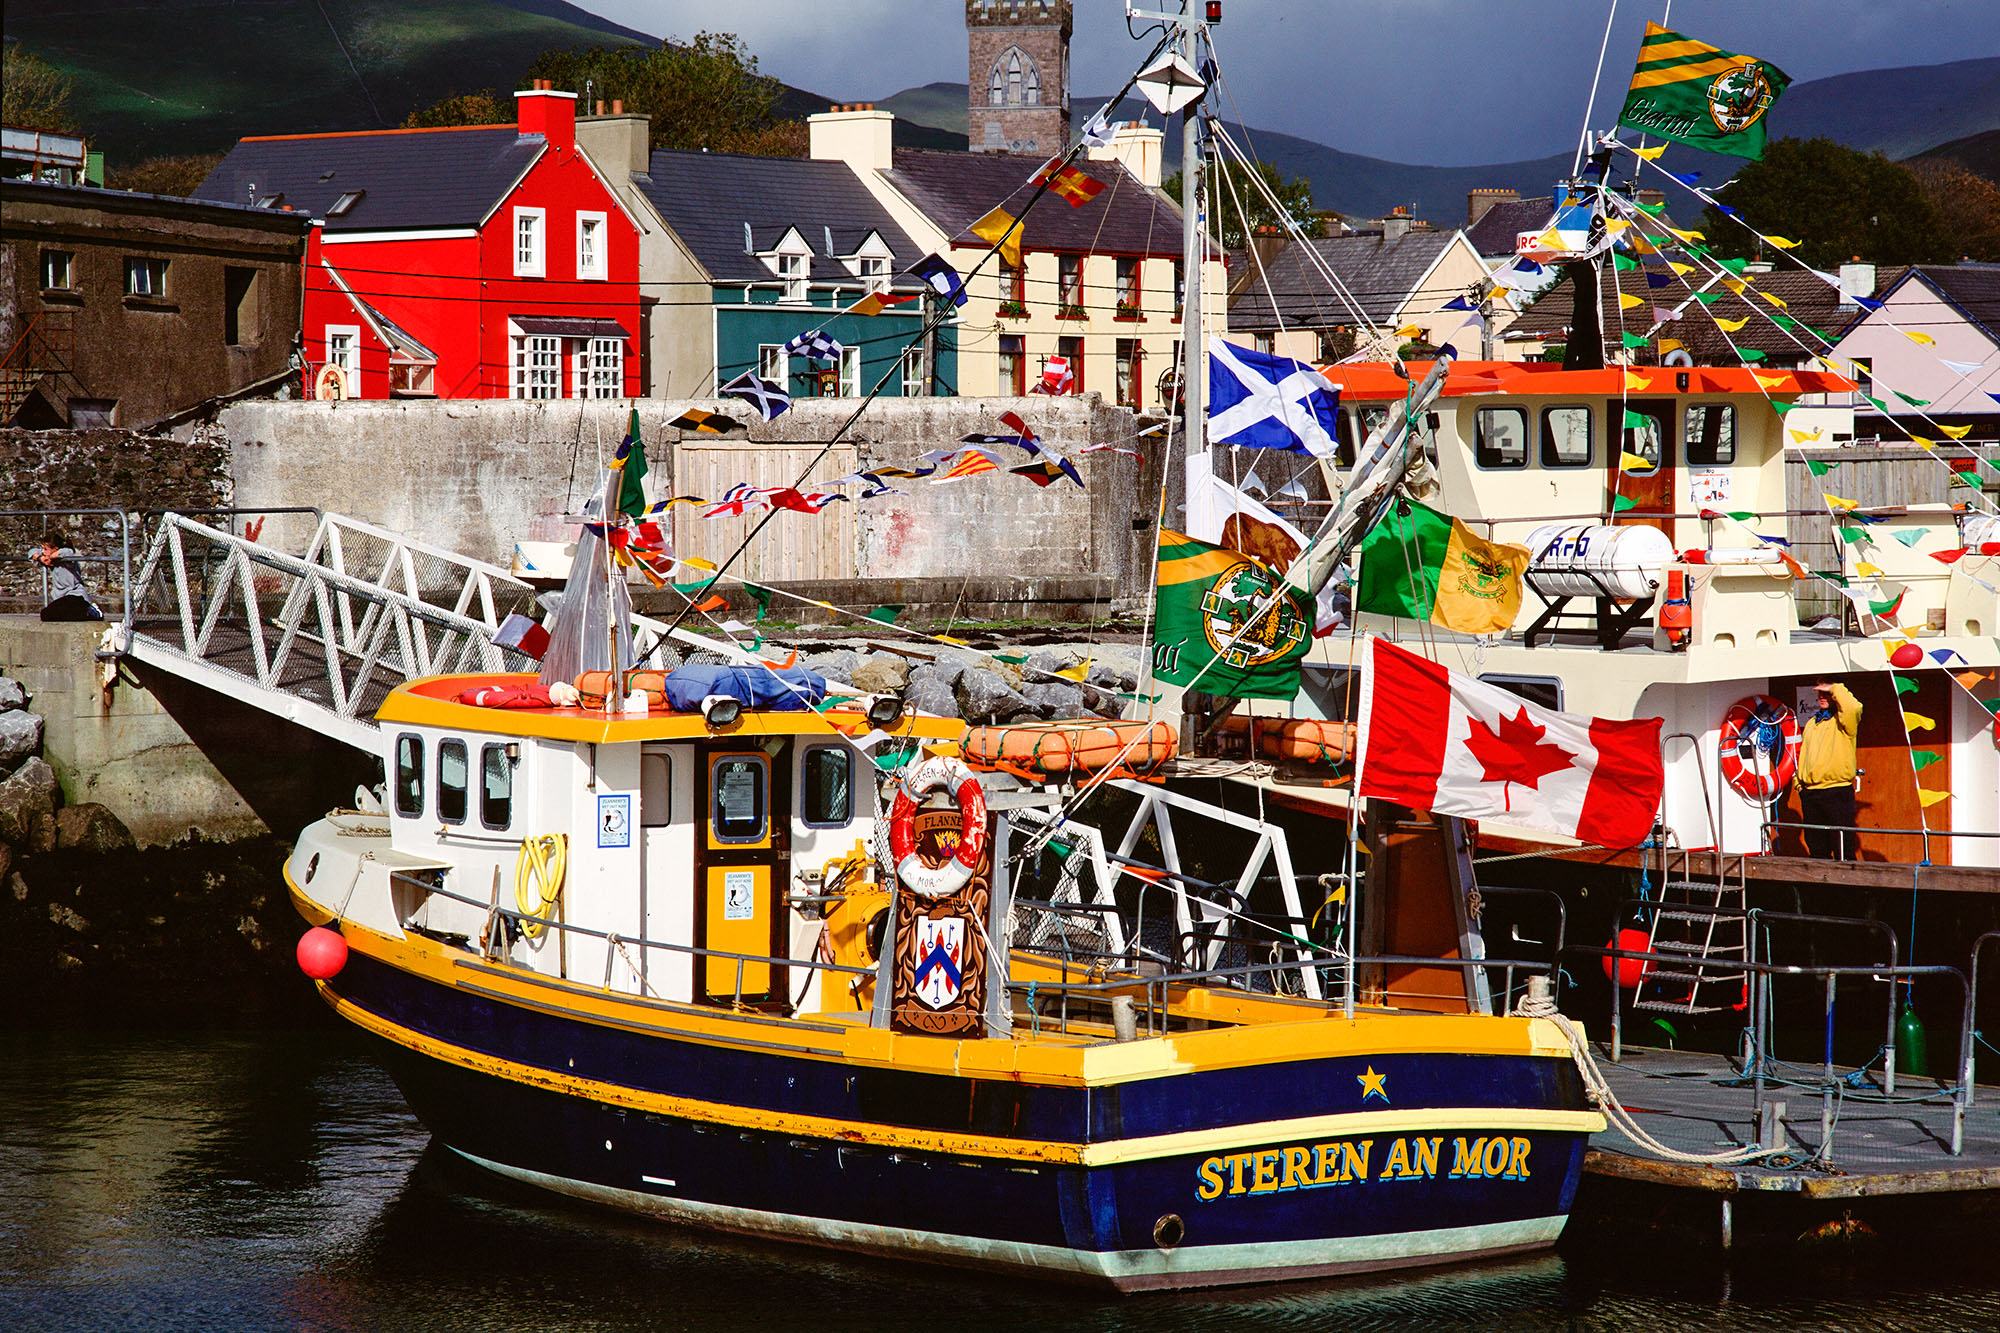 Captured with my Bronica ETRSi camera on Fuji Velvia Film, this image unveils the vibrant beauty of Dingle Harbor, Ireland. The...